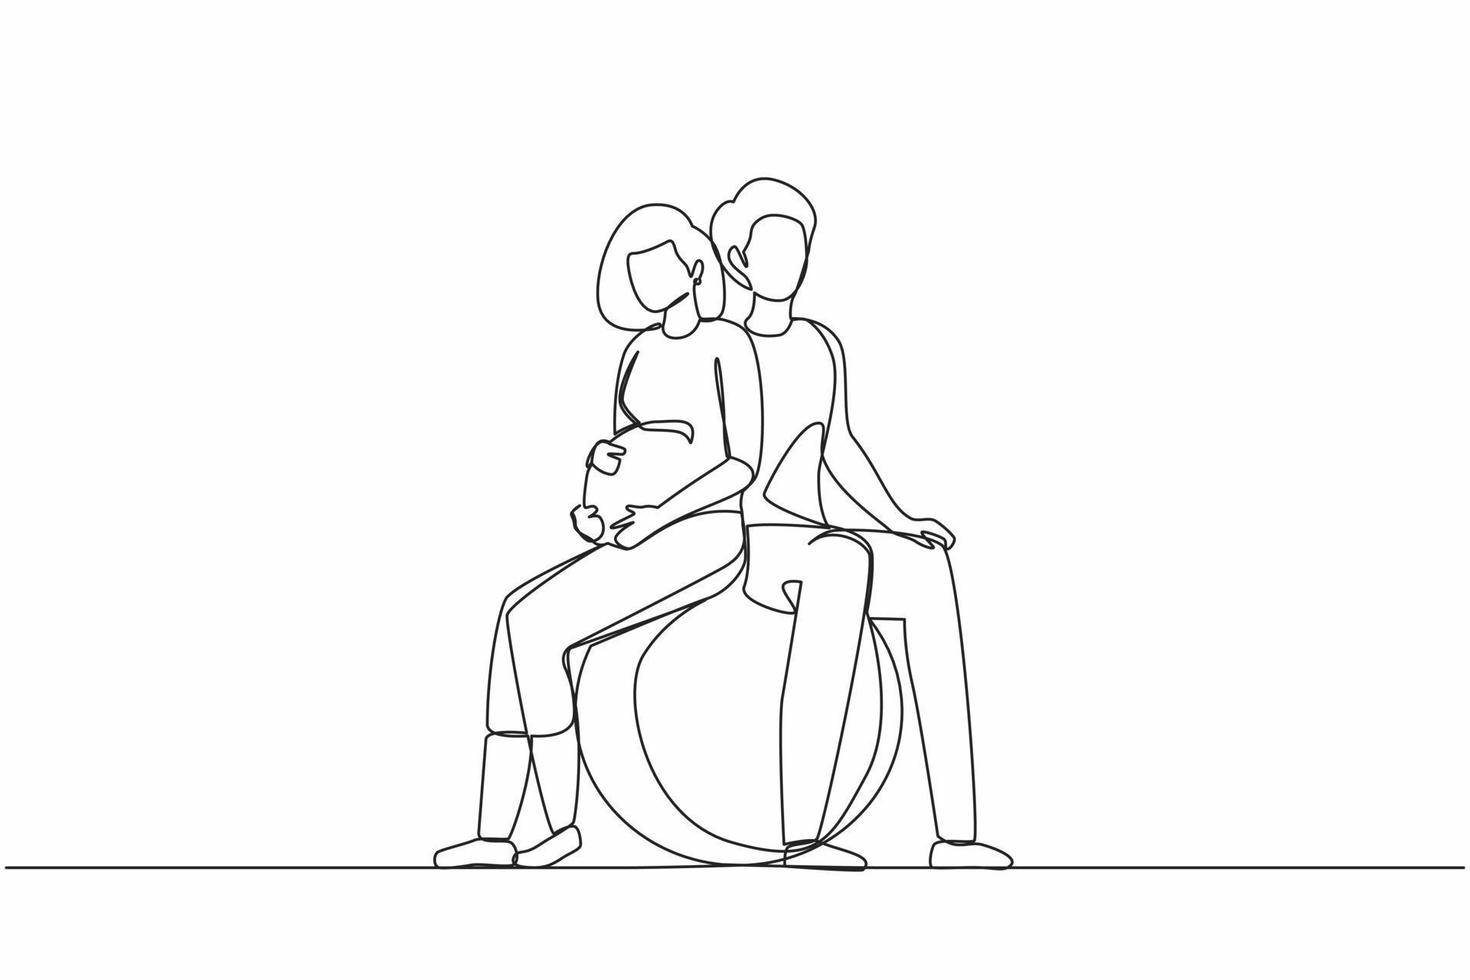 Single one line drawing young expecting parents in yoga class for pregnant women. Man and pregnant woman sitting in gymnasium ball. Paired yoga for pregnant women. Continuous line draw design vector